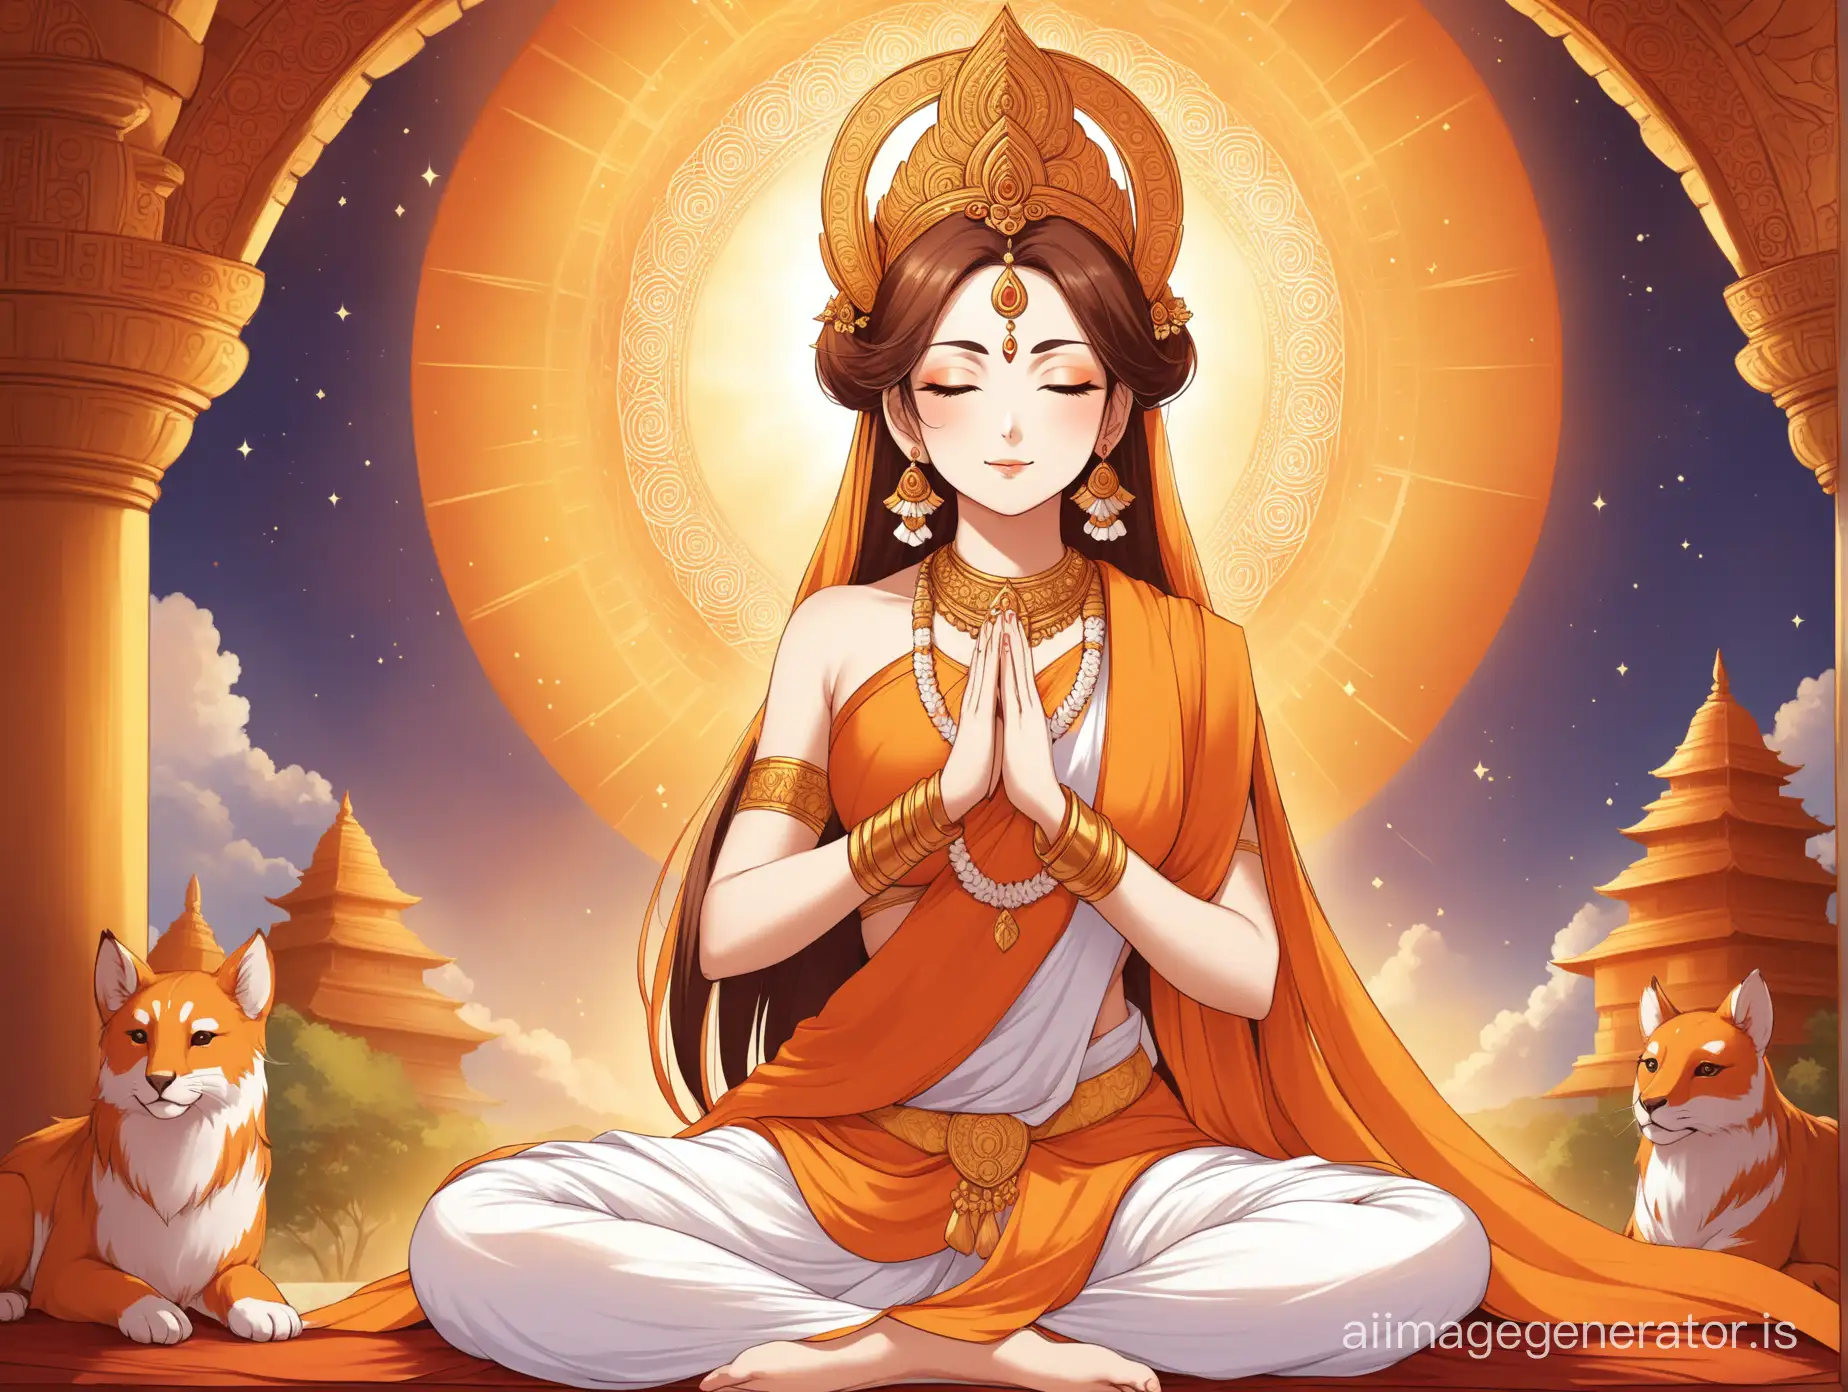 Capture the serene beauty of Goddess Sita as she sits in meditation, radiating inner peace and spiritual wisdom.